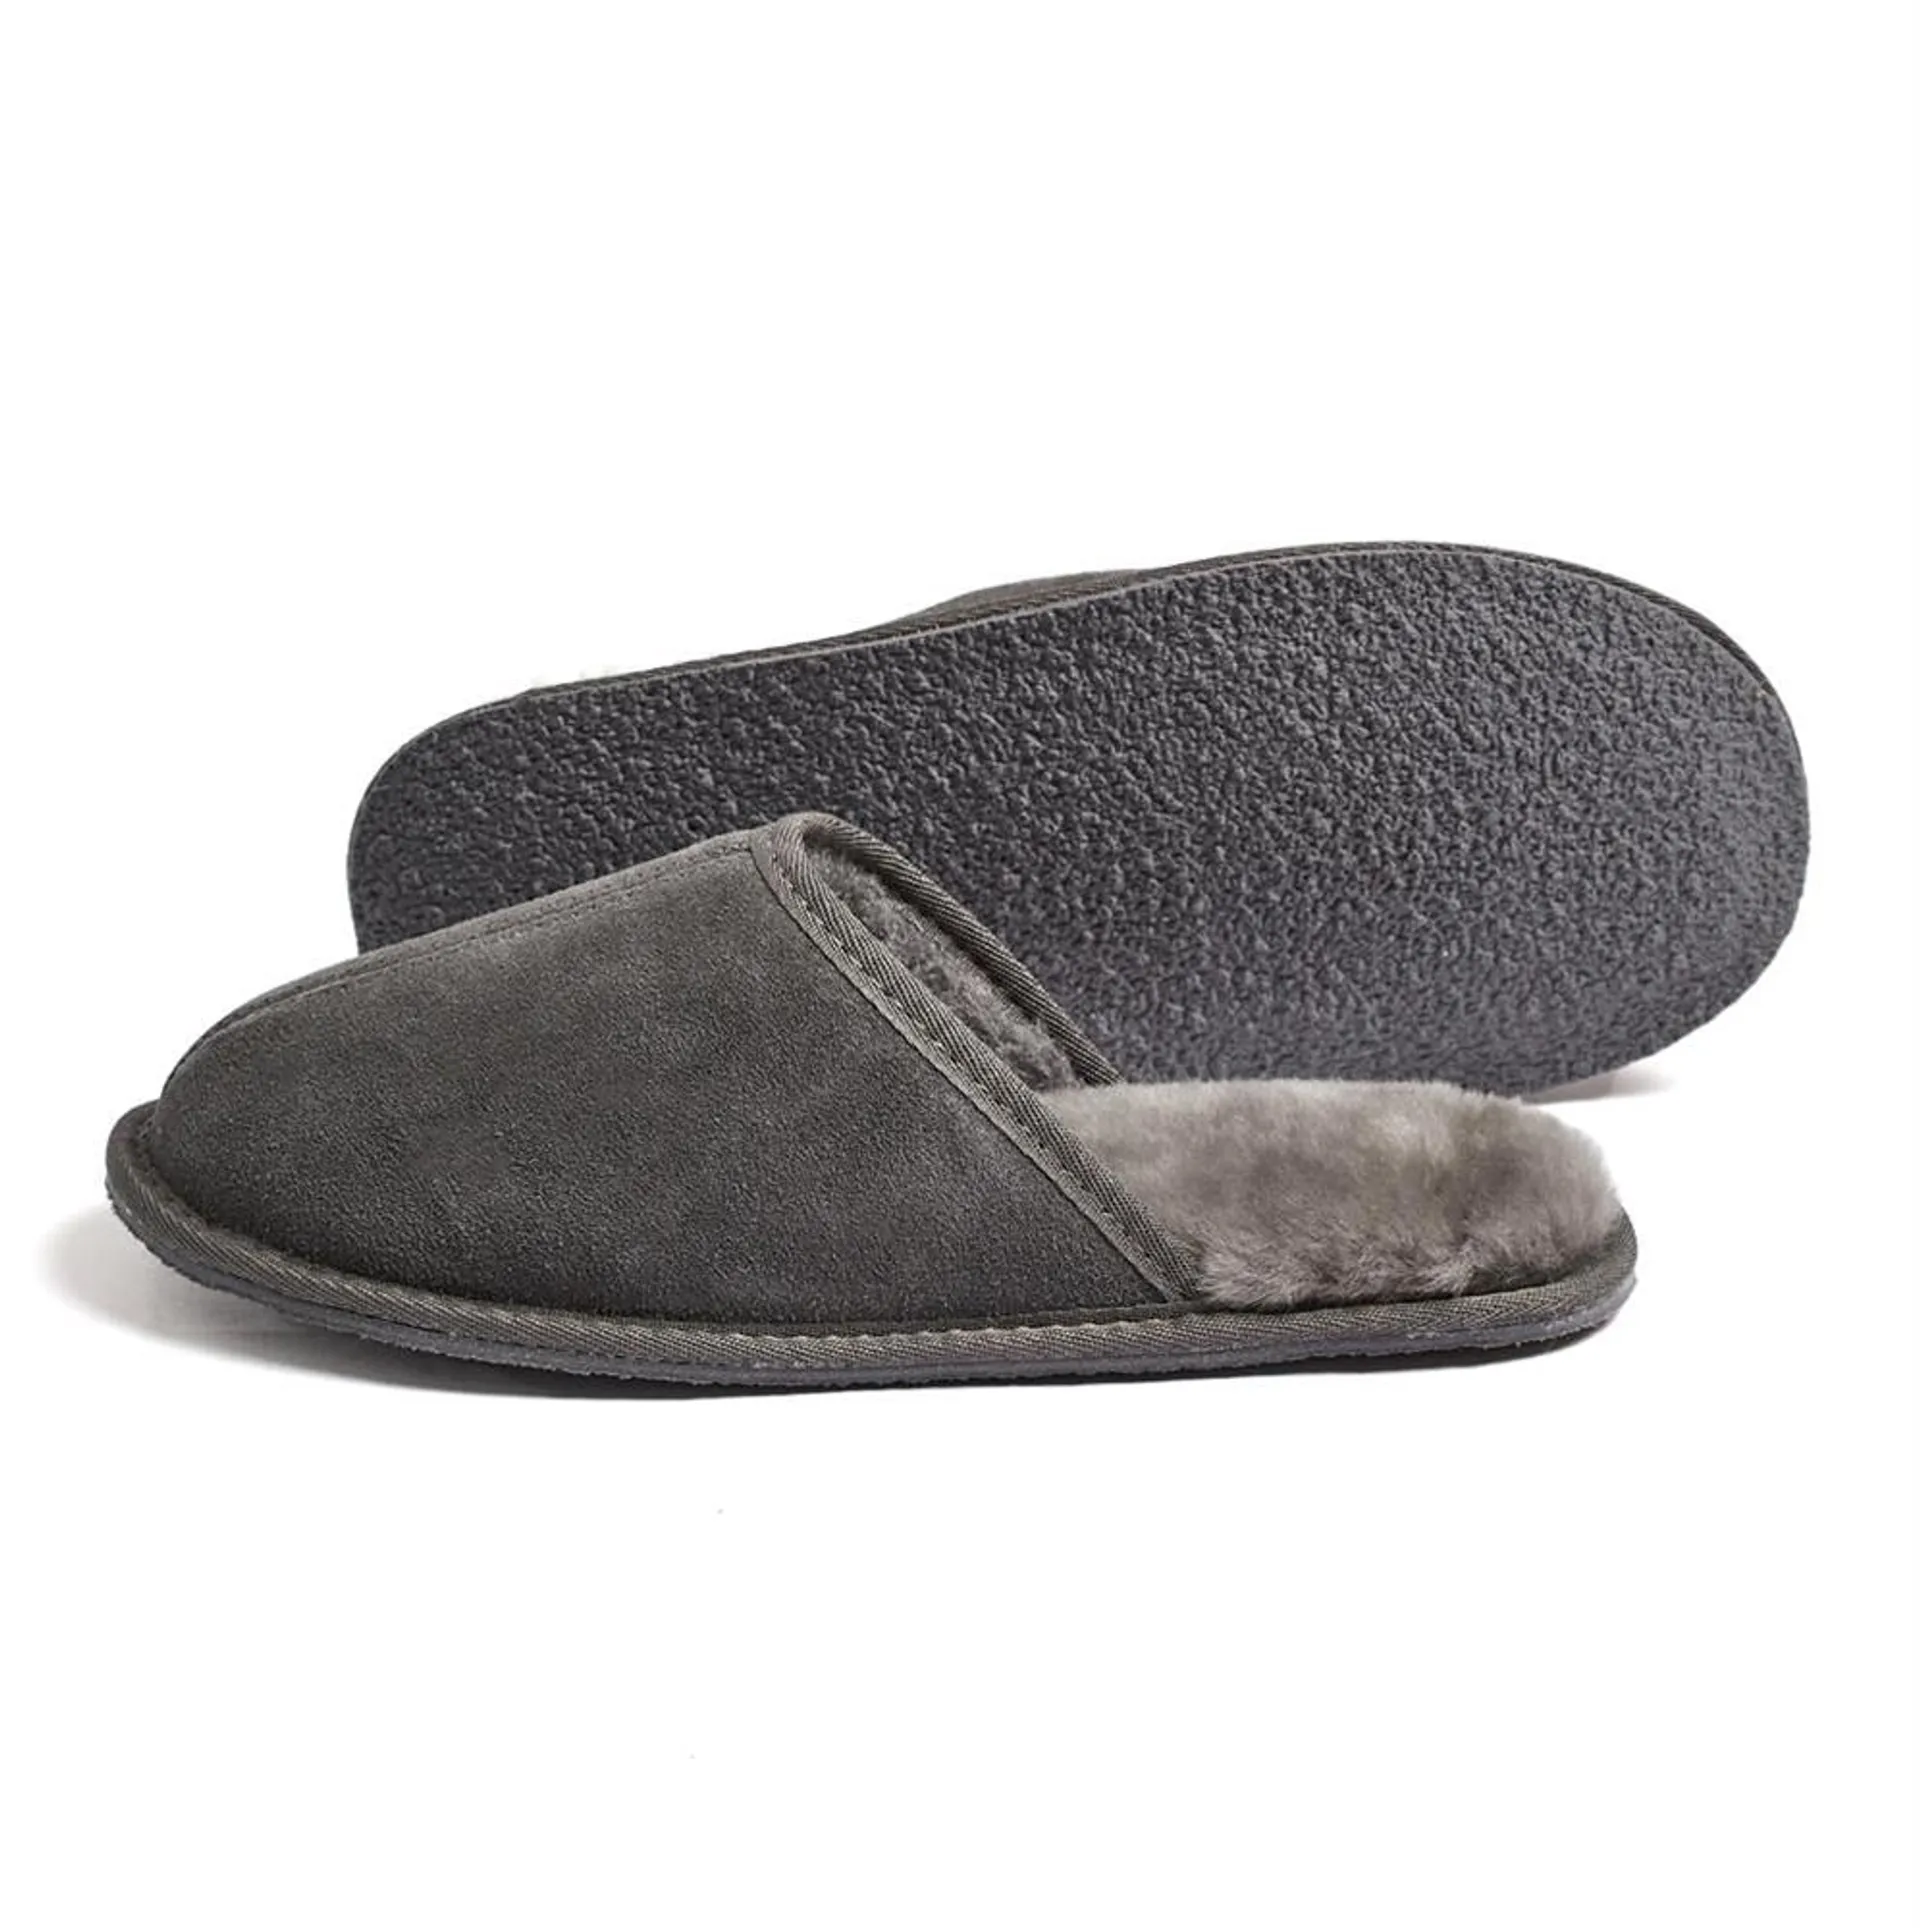 Snugglers by Totes: Men's Sheepskin Slippers